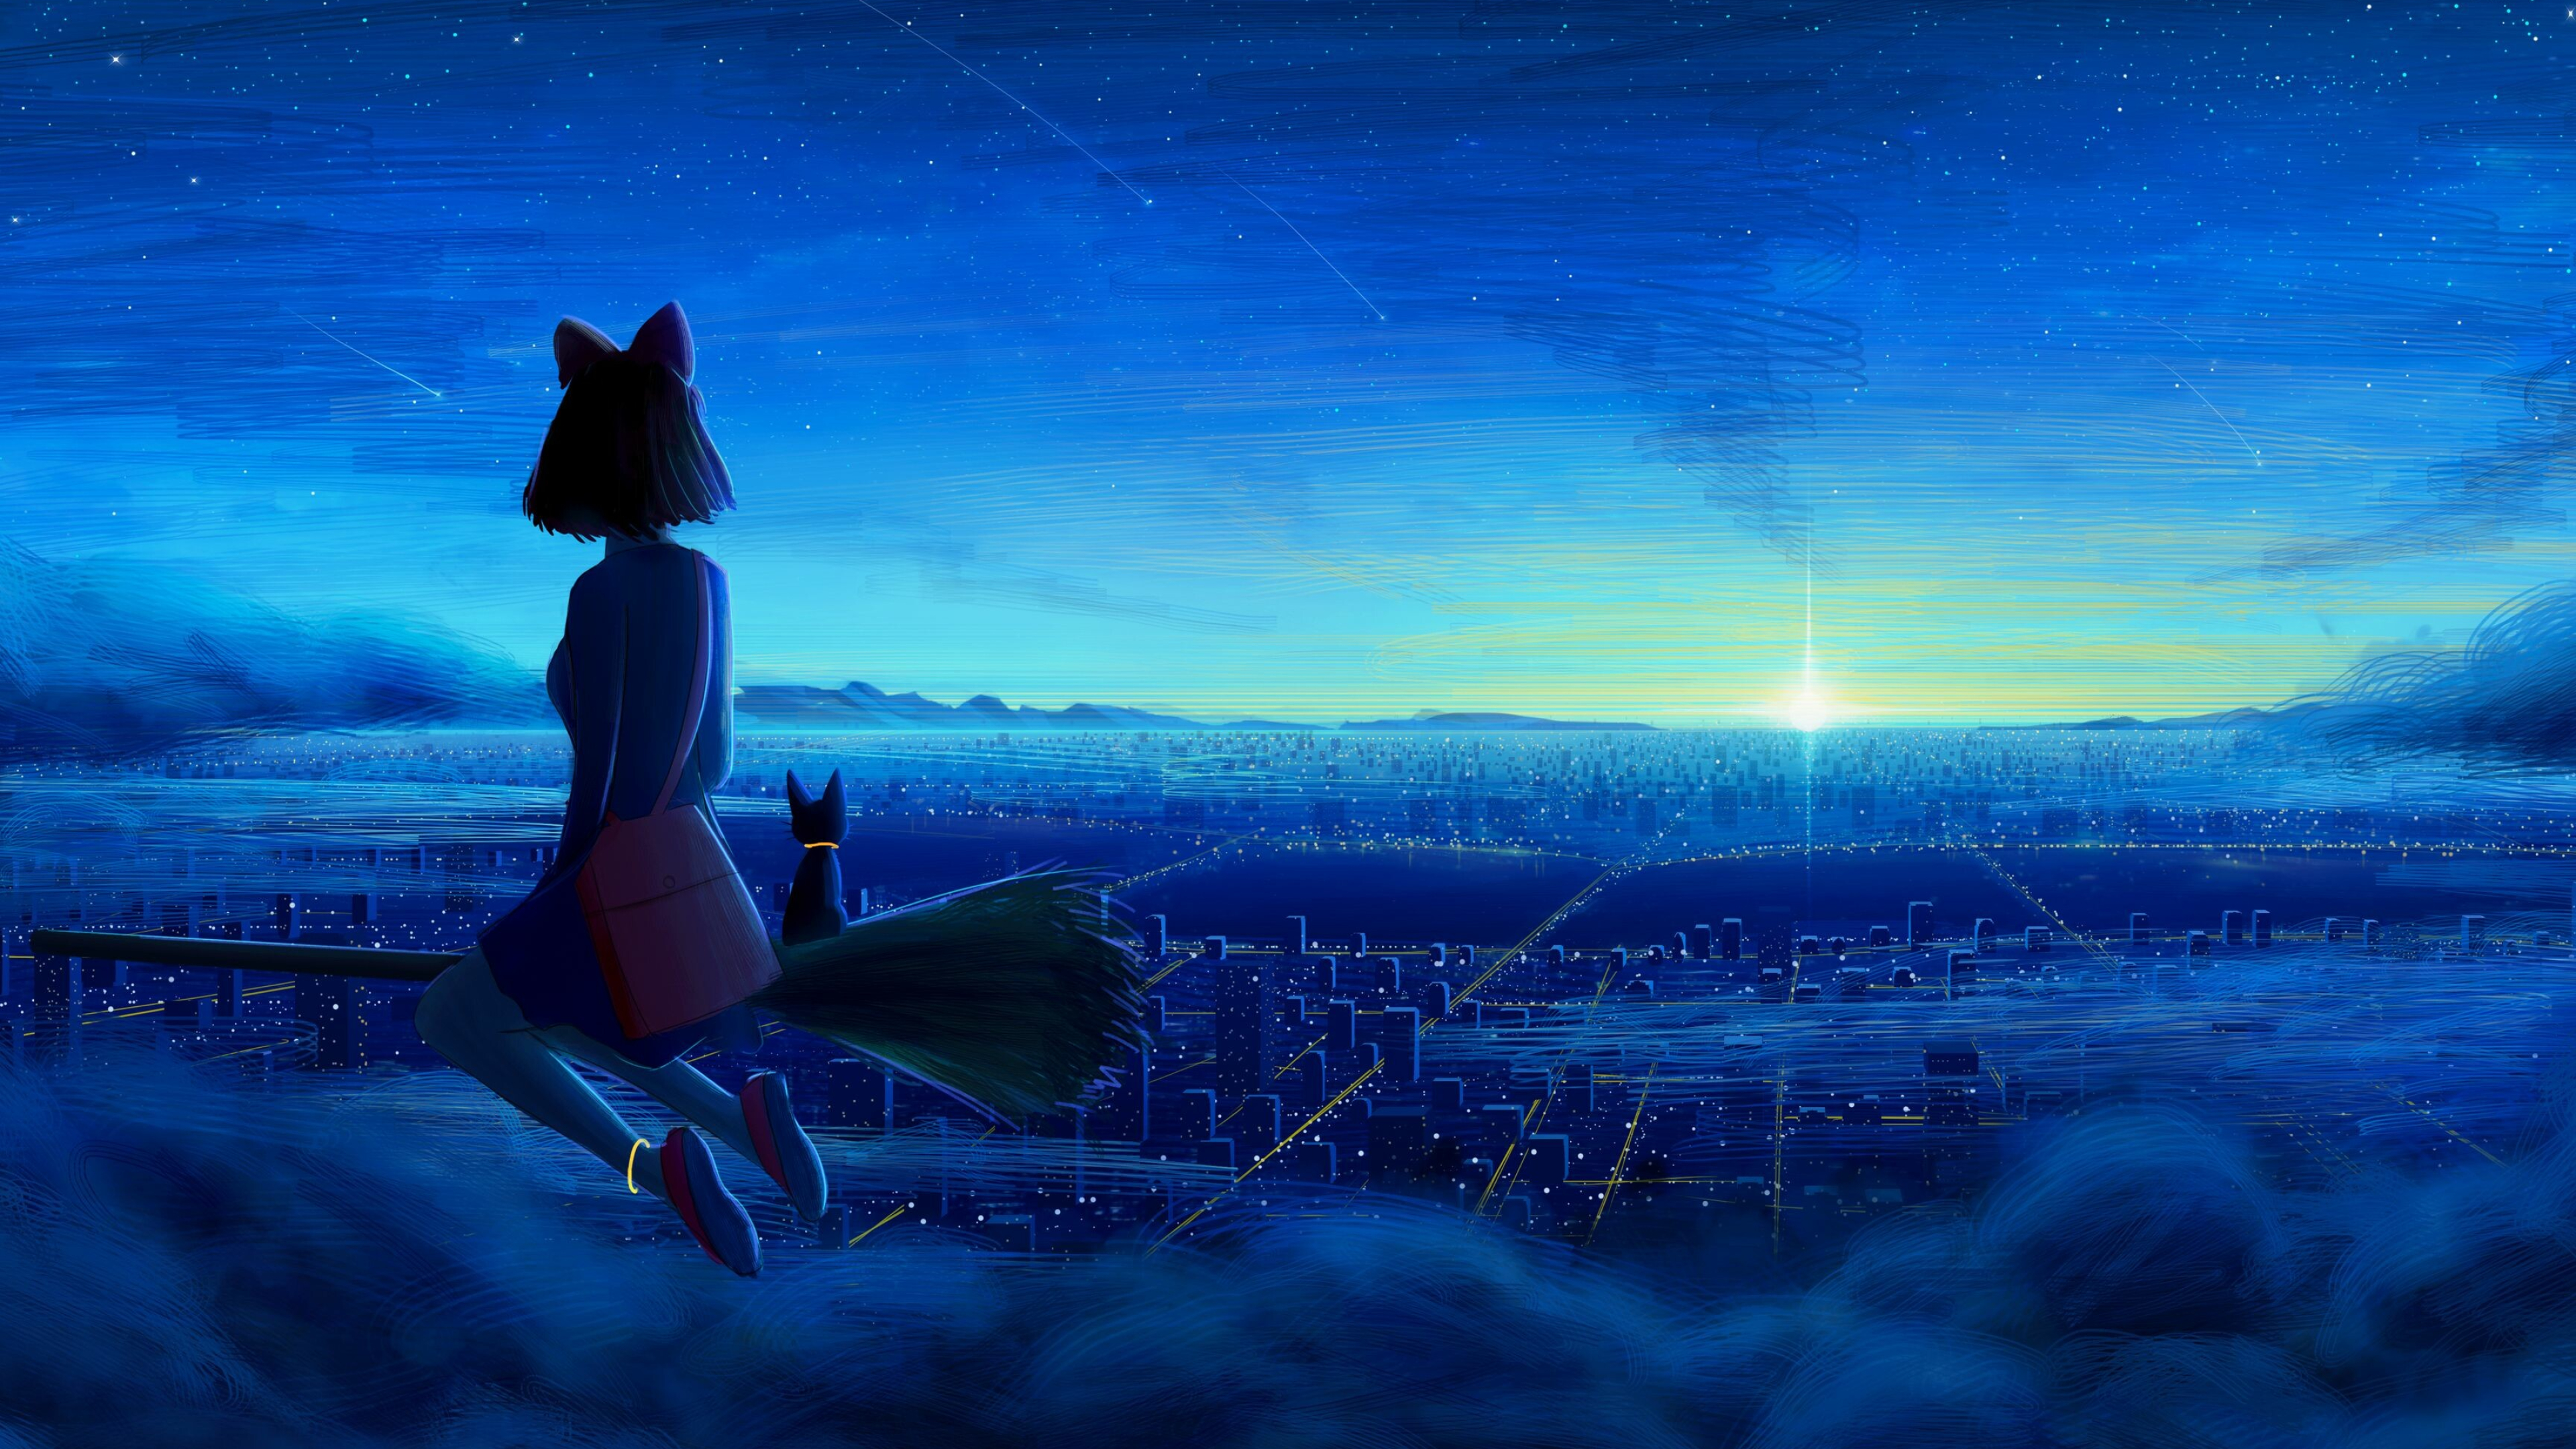 Kiki's Delivery Service: Animated fantasy film adapted from the 1985 novel by Eiko Kadono. 3840x2160 4K Wallpaper.